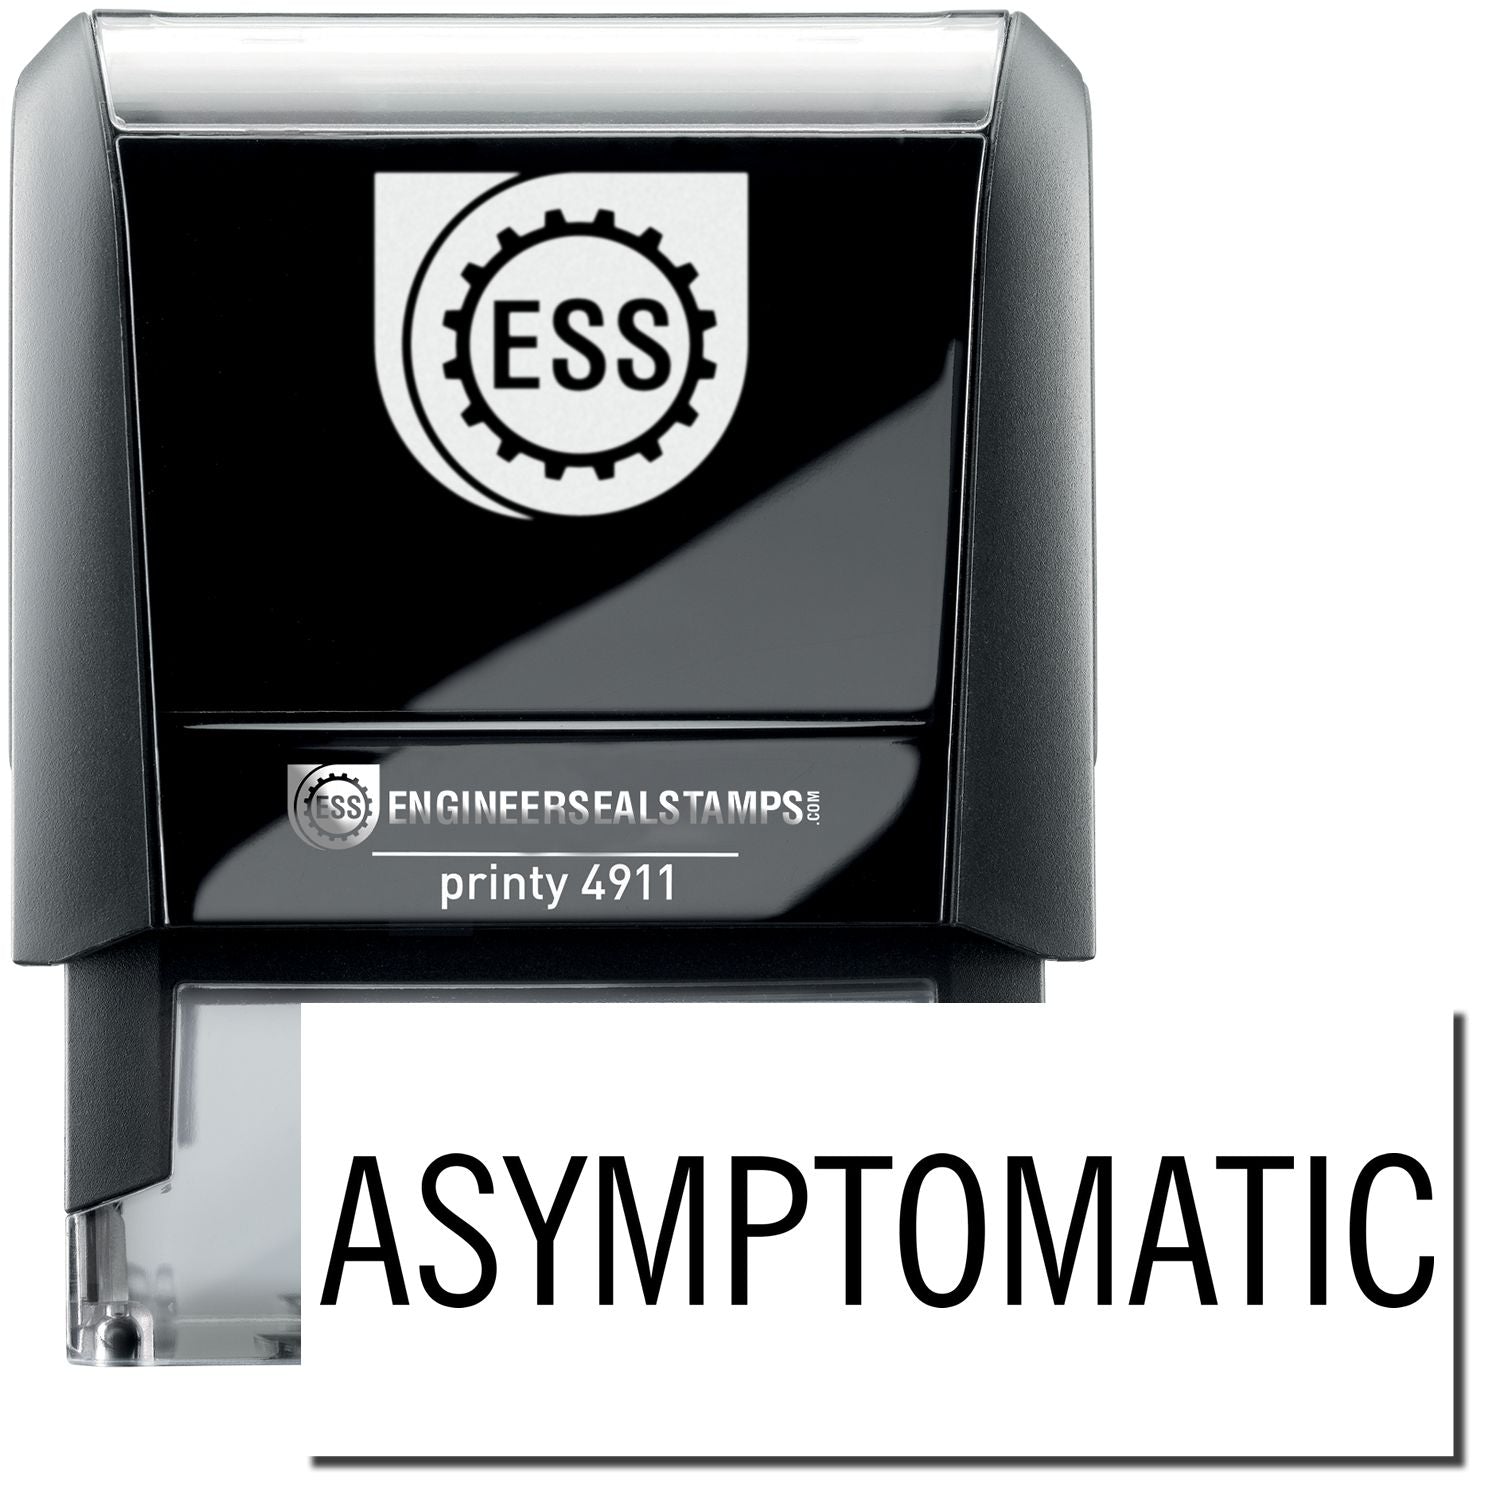 A self-inking stamp with a stamped image showing how the text "ASYMPTOMATIC" is displayed after stamping.